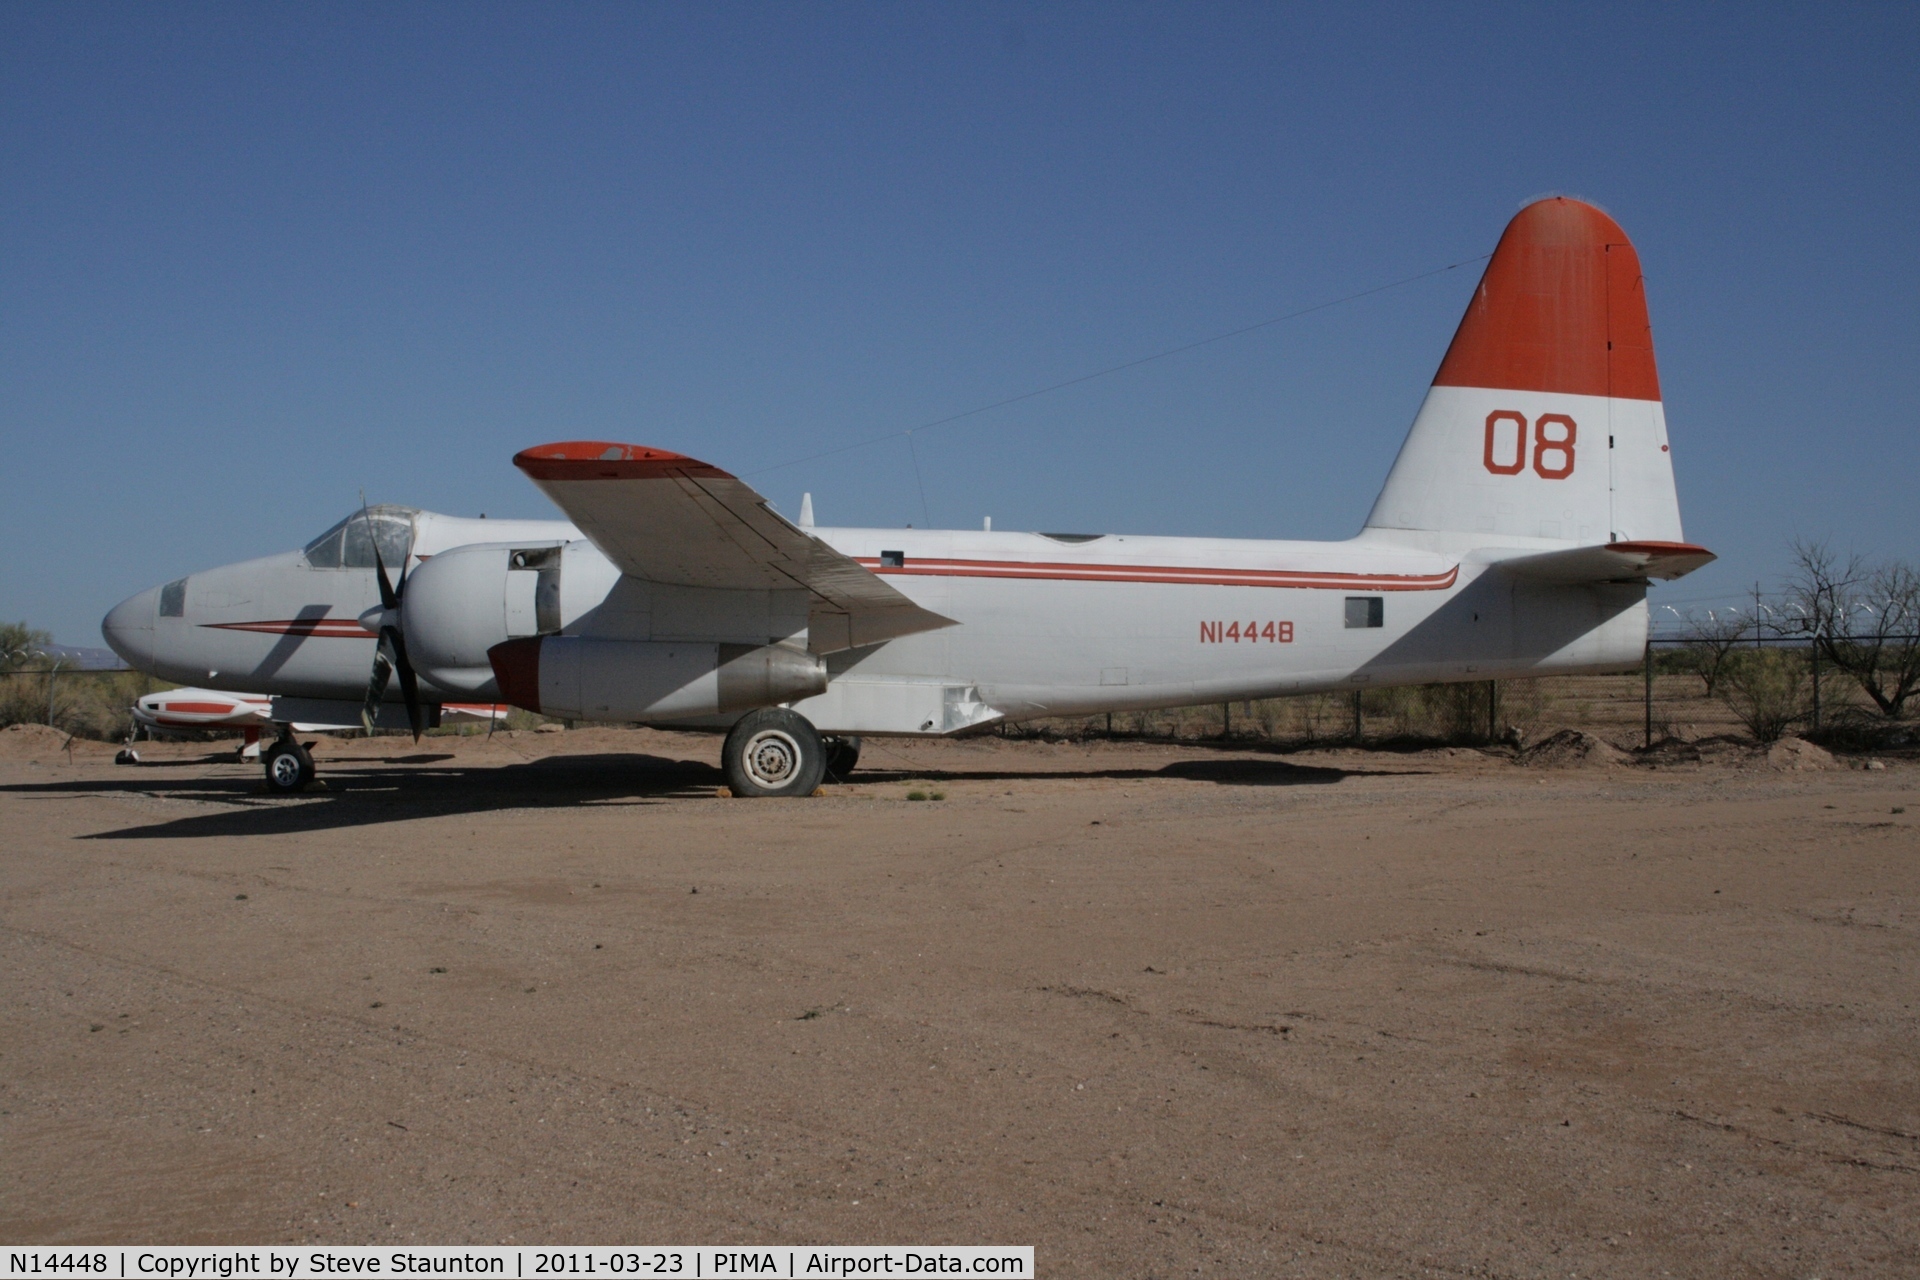 N14448, 1955 Lockheed P-2H(AT) C/N 826-8013, Taken at Pima Air and Space Museum, in March 2011 whilst on an Aeroprint Aviation tour